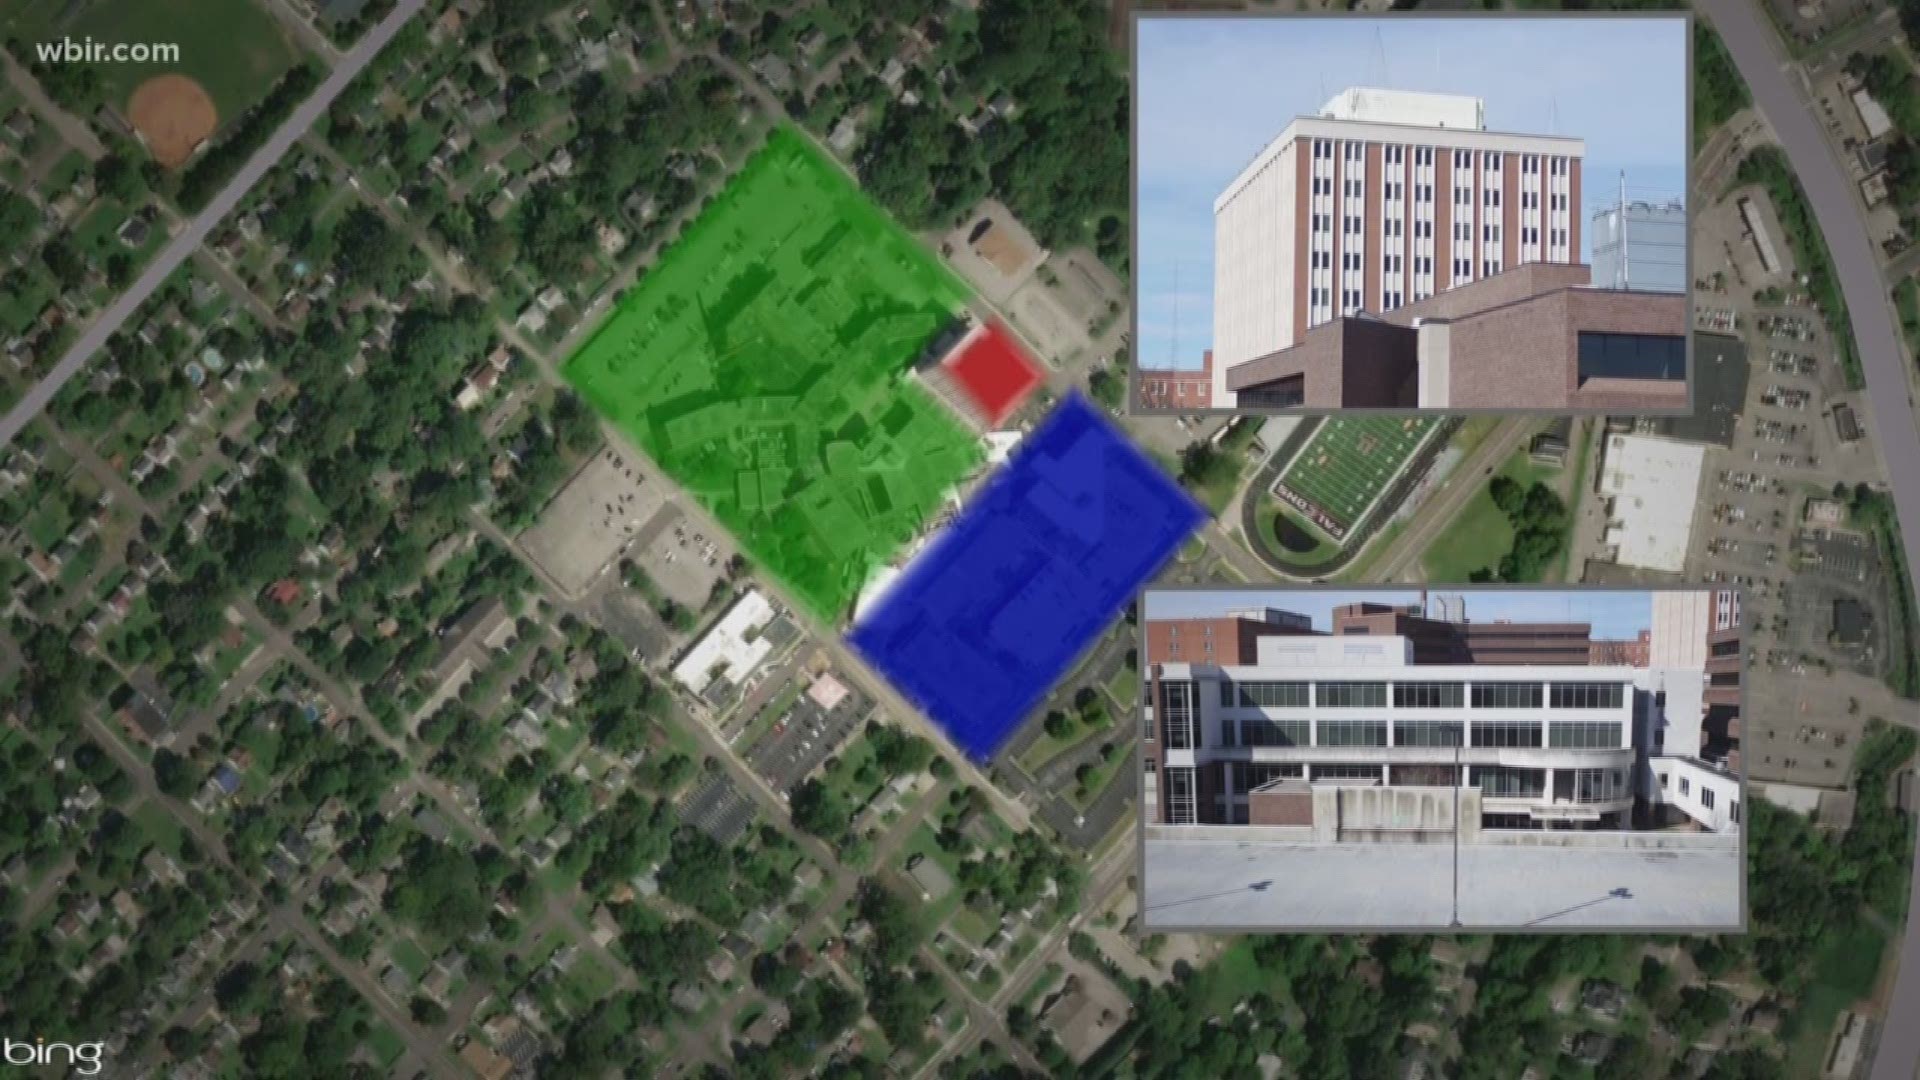 City leaders approved buying the old St. Mary's Hospital site to convert it into a new public safety complex.